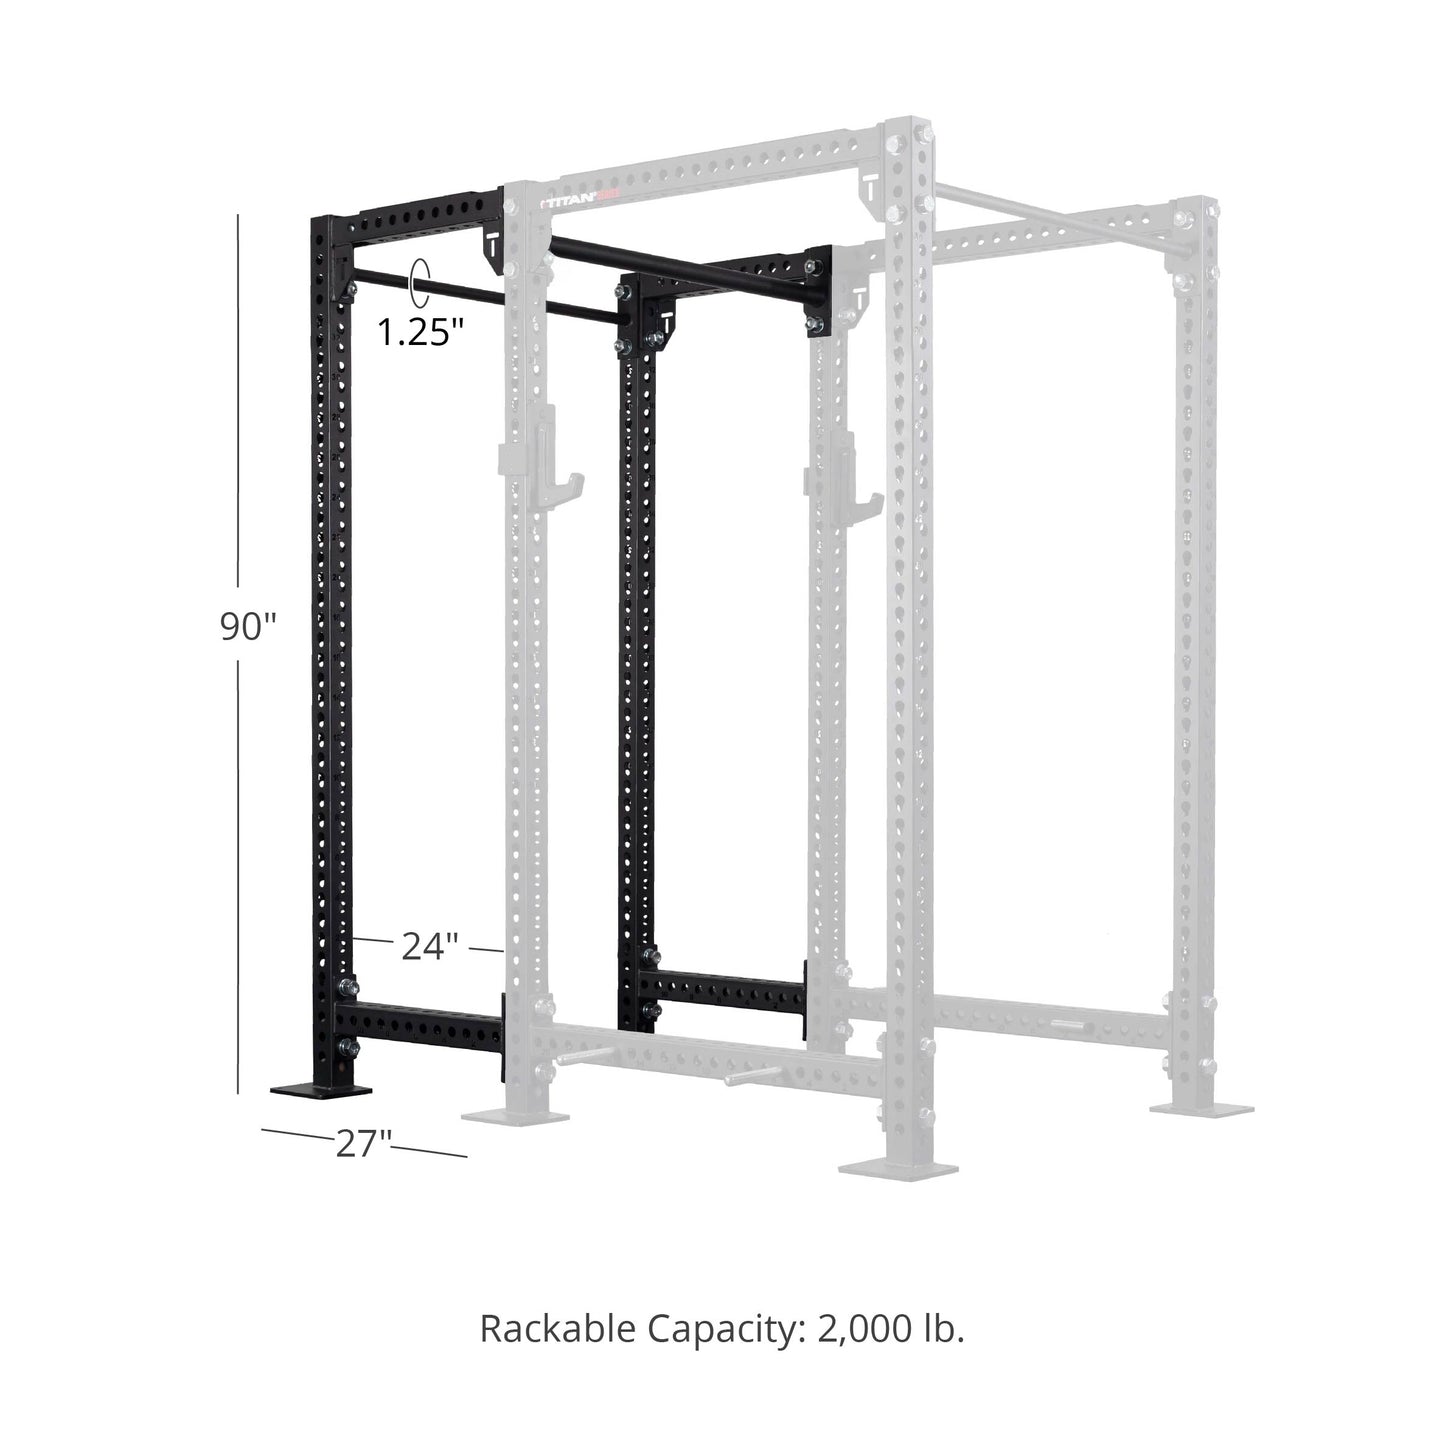 TITAN Series 24" Extension Kit - Extension Color: Black - Extension Height: 90" - Crossmember: 1.25" Pull-Up Bar | Black / 90" / 1.25" Pull-Up Bar - view 13